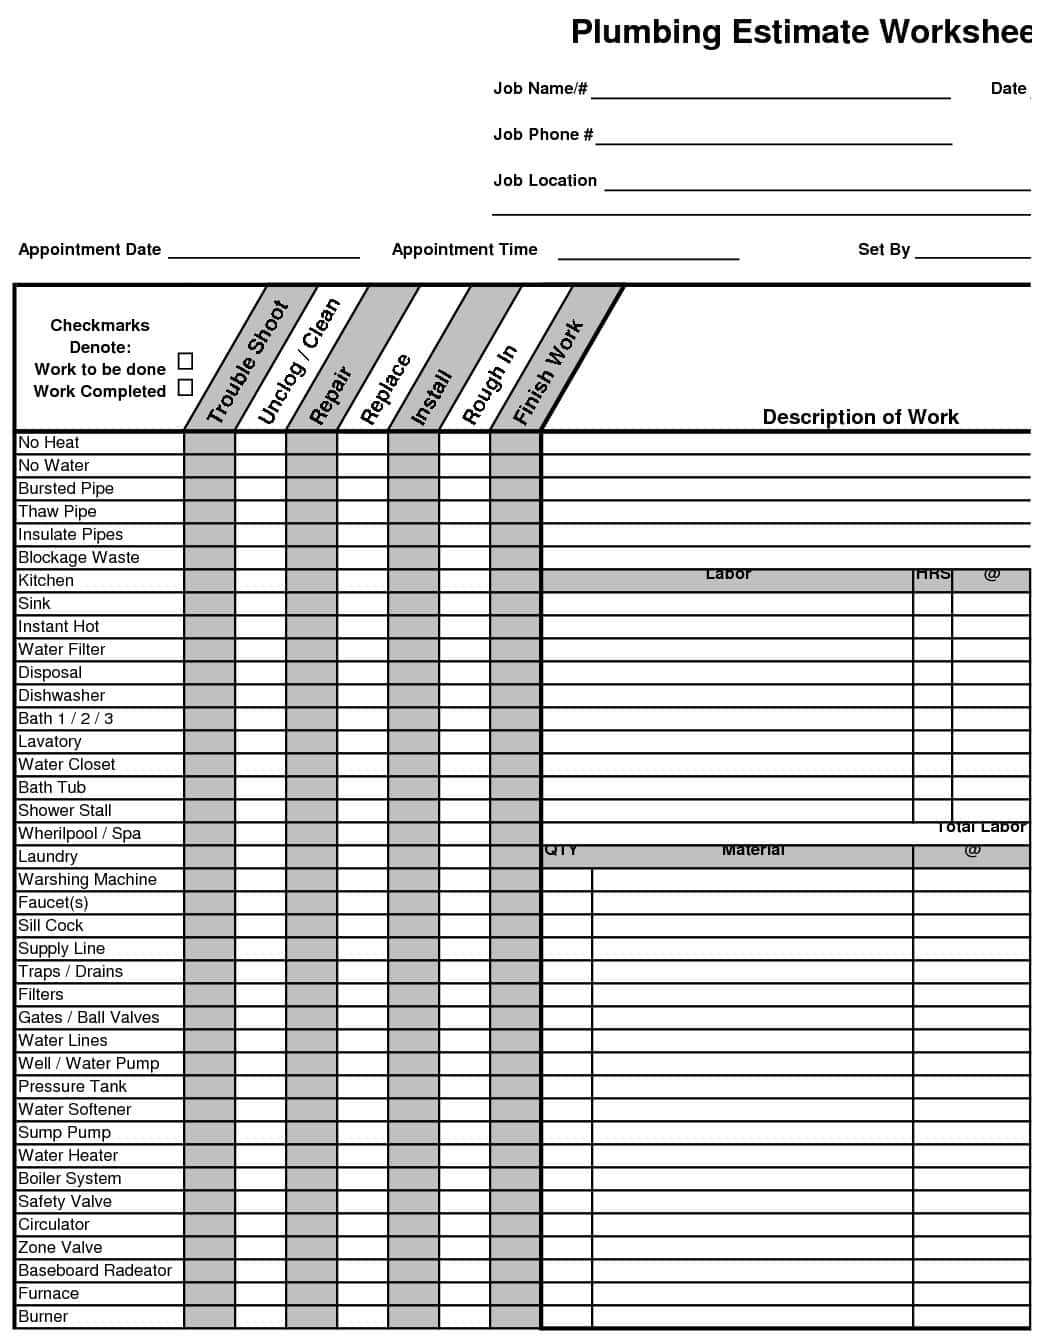 Building Estimate Excel Sheet And Construction Job Costing Template